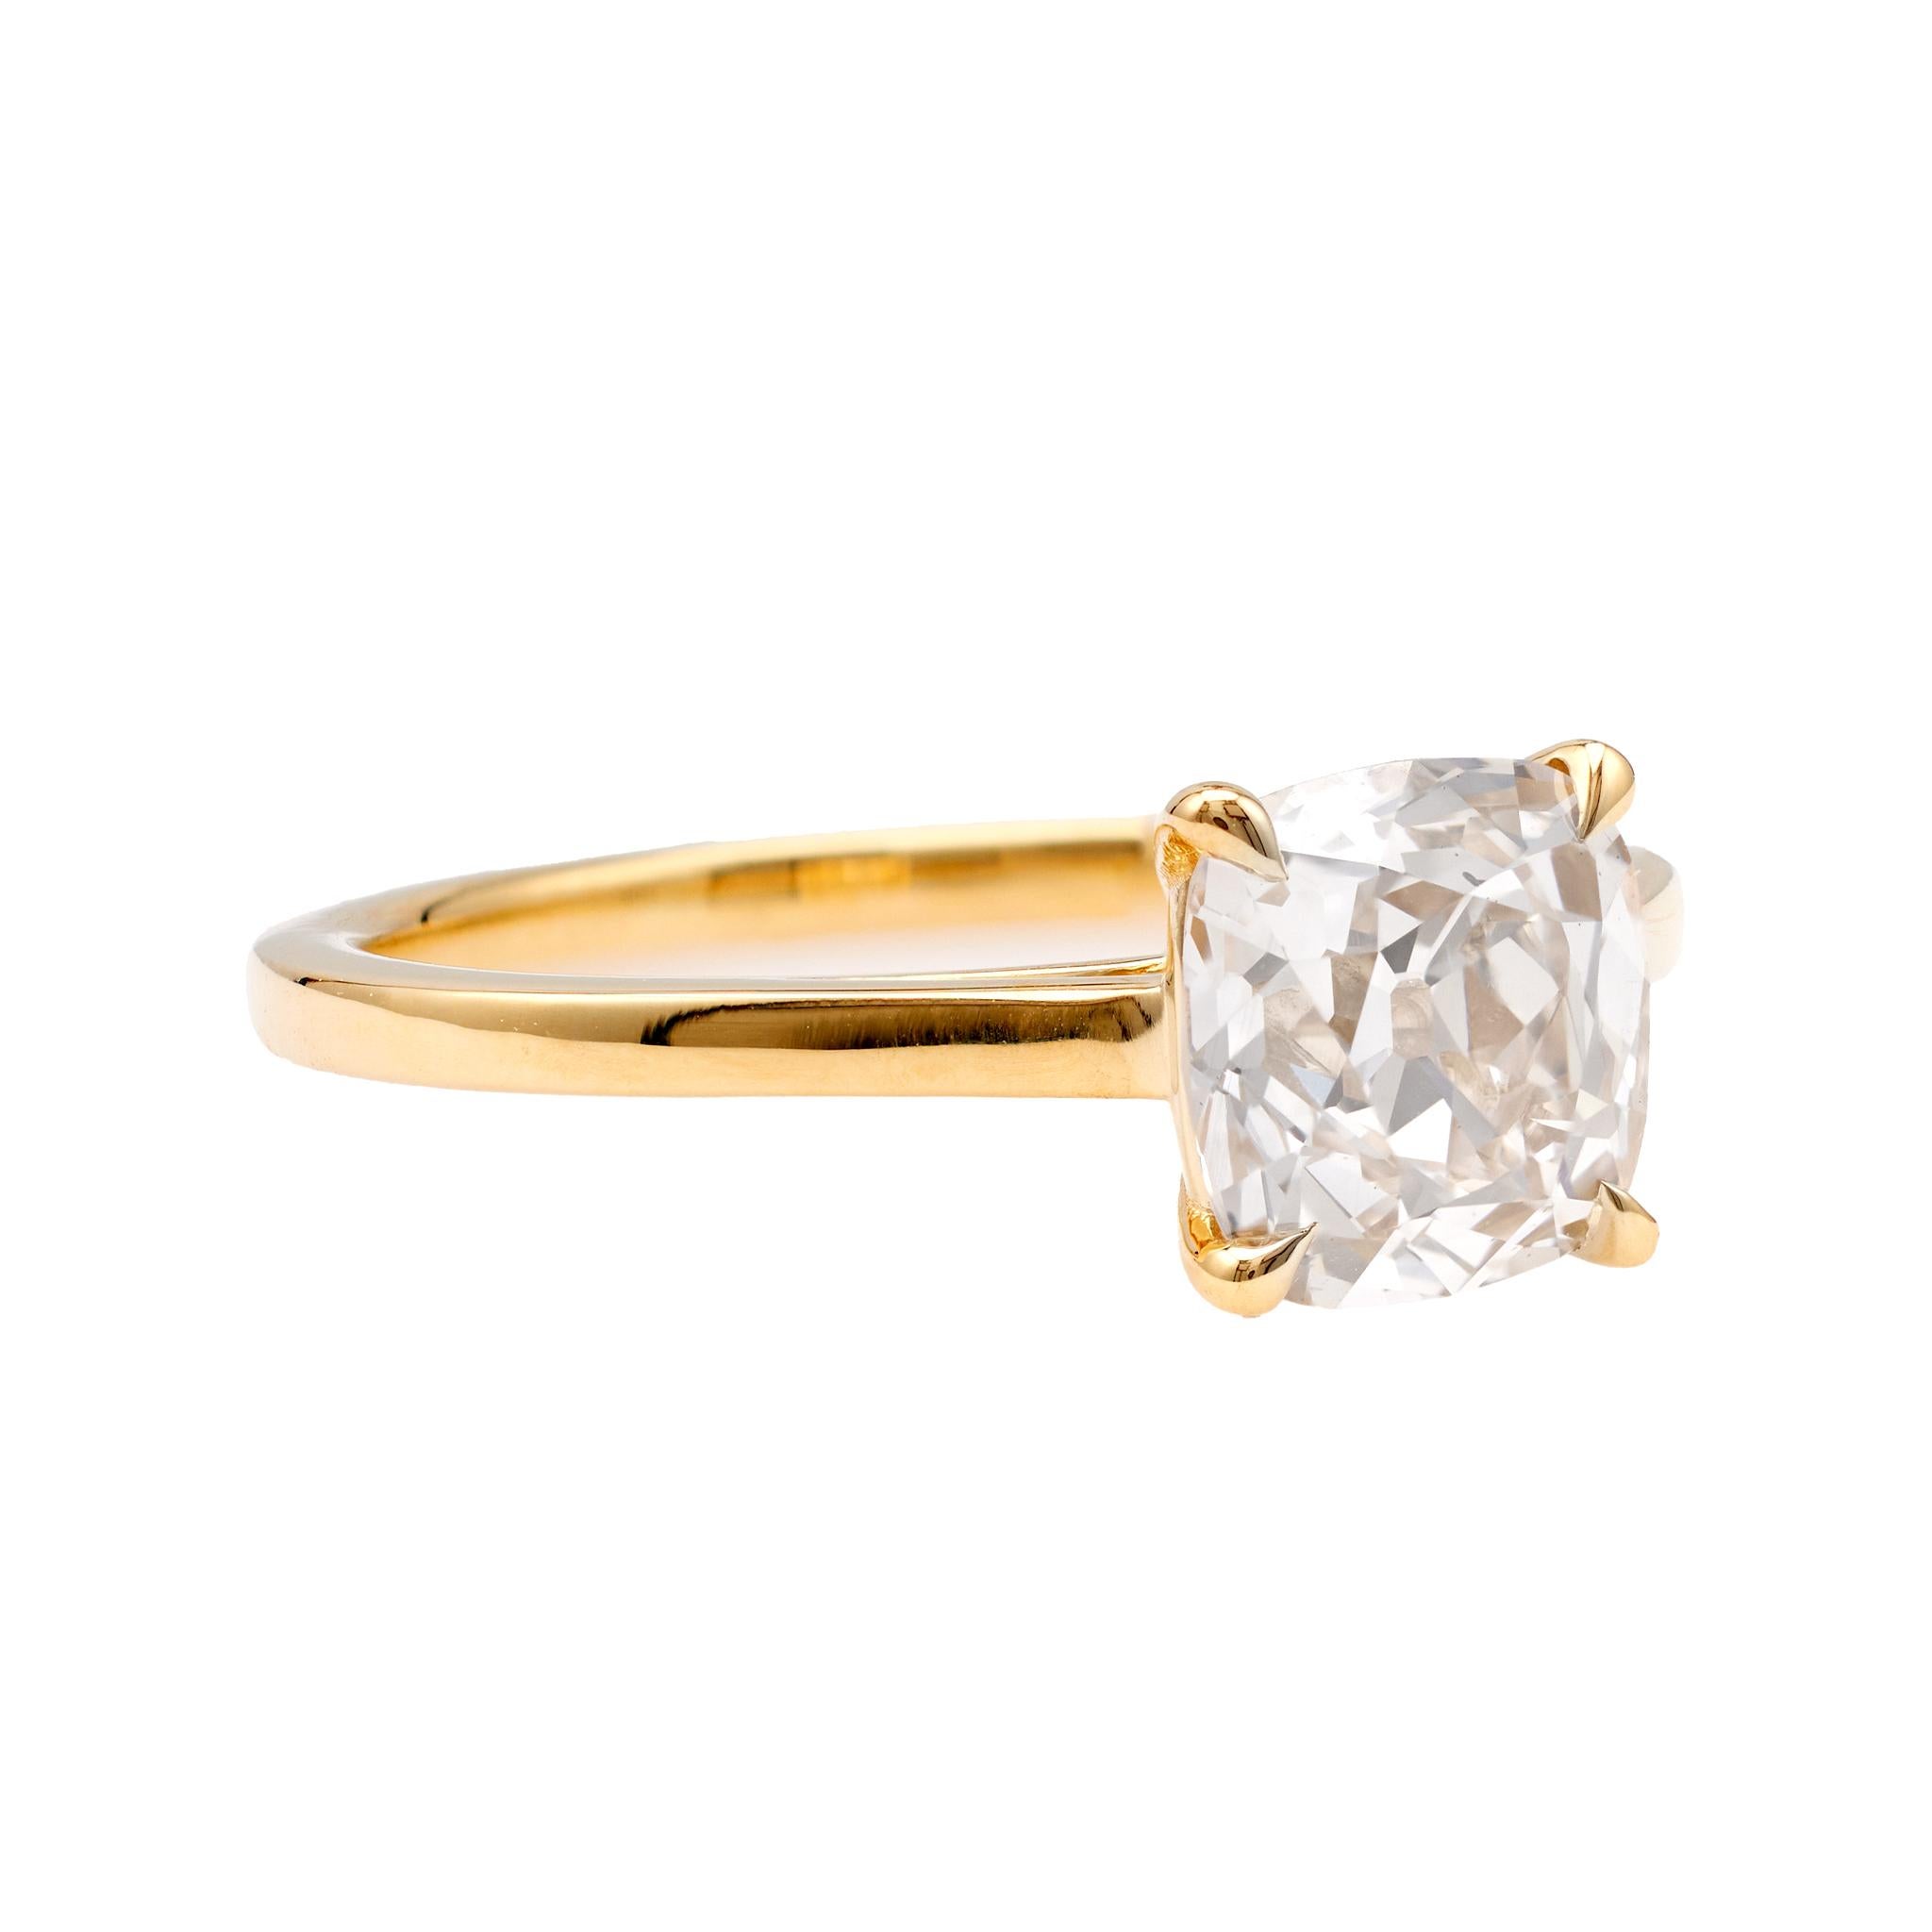 GIA 1.83 Carat Old Mine Cut Diamond 18k Yellow Gold Solitaire Ring For Sale 1